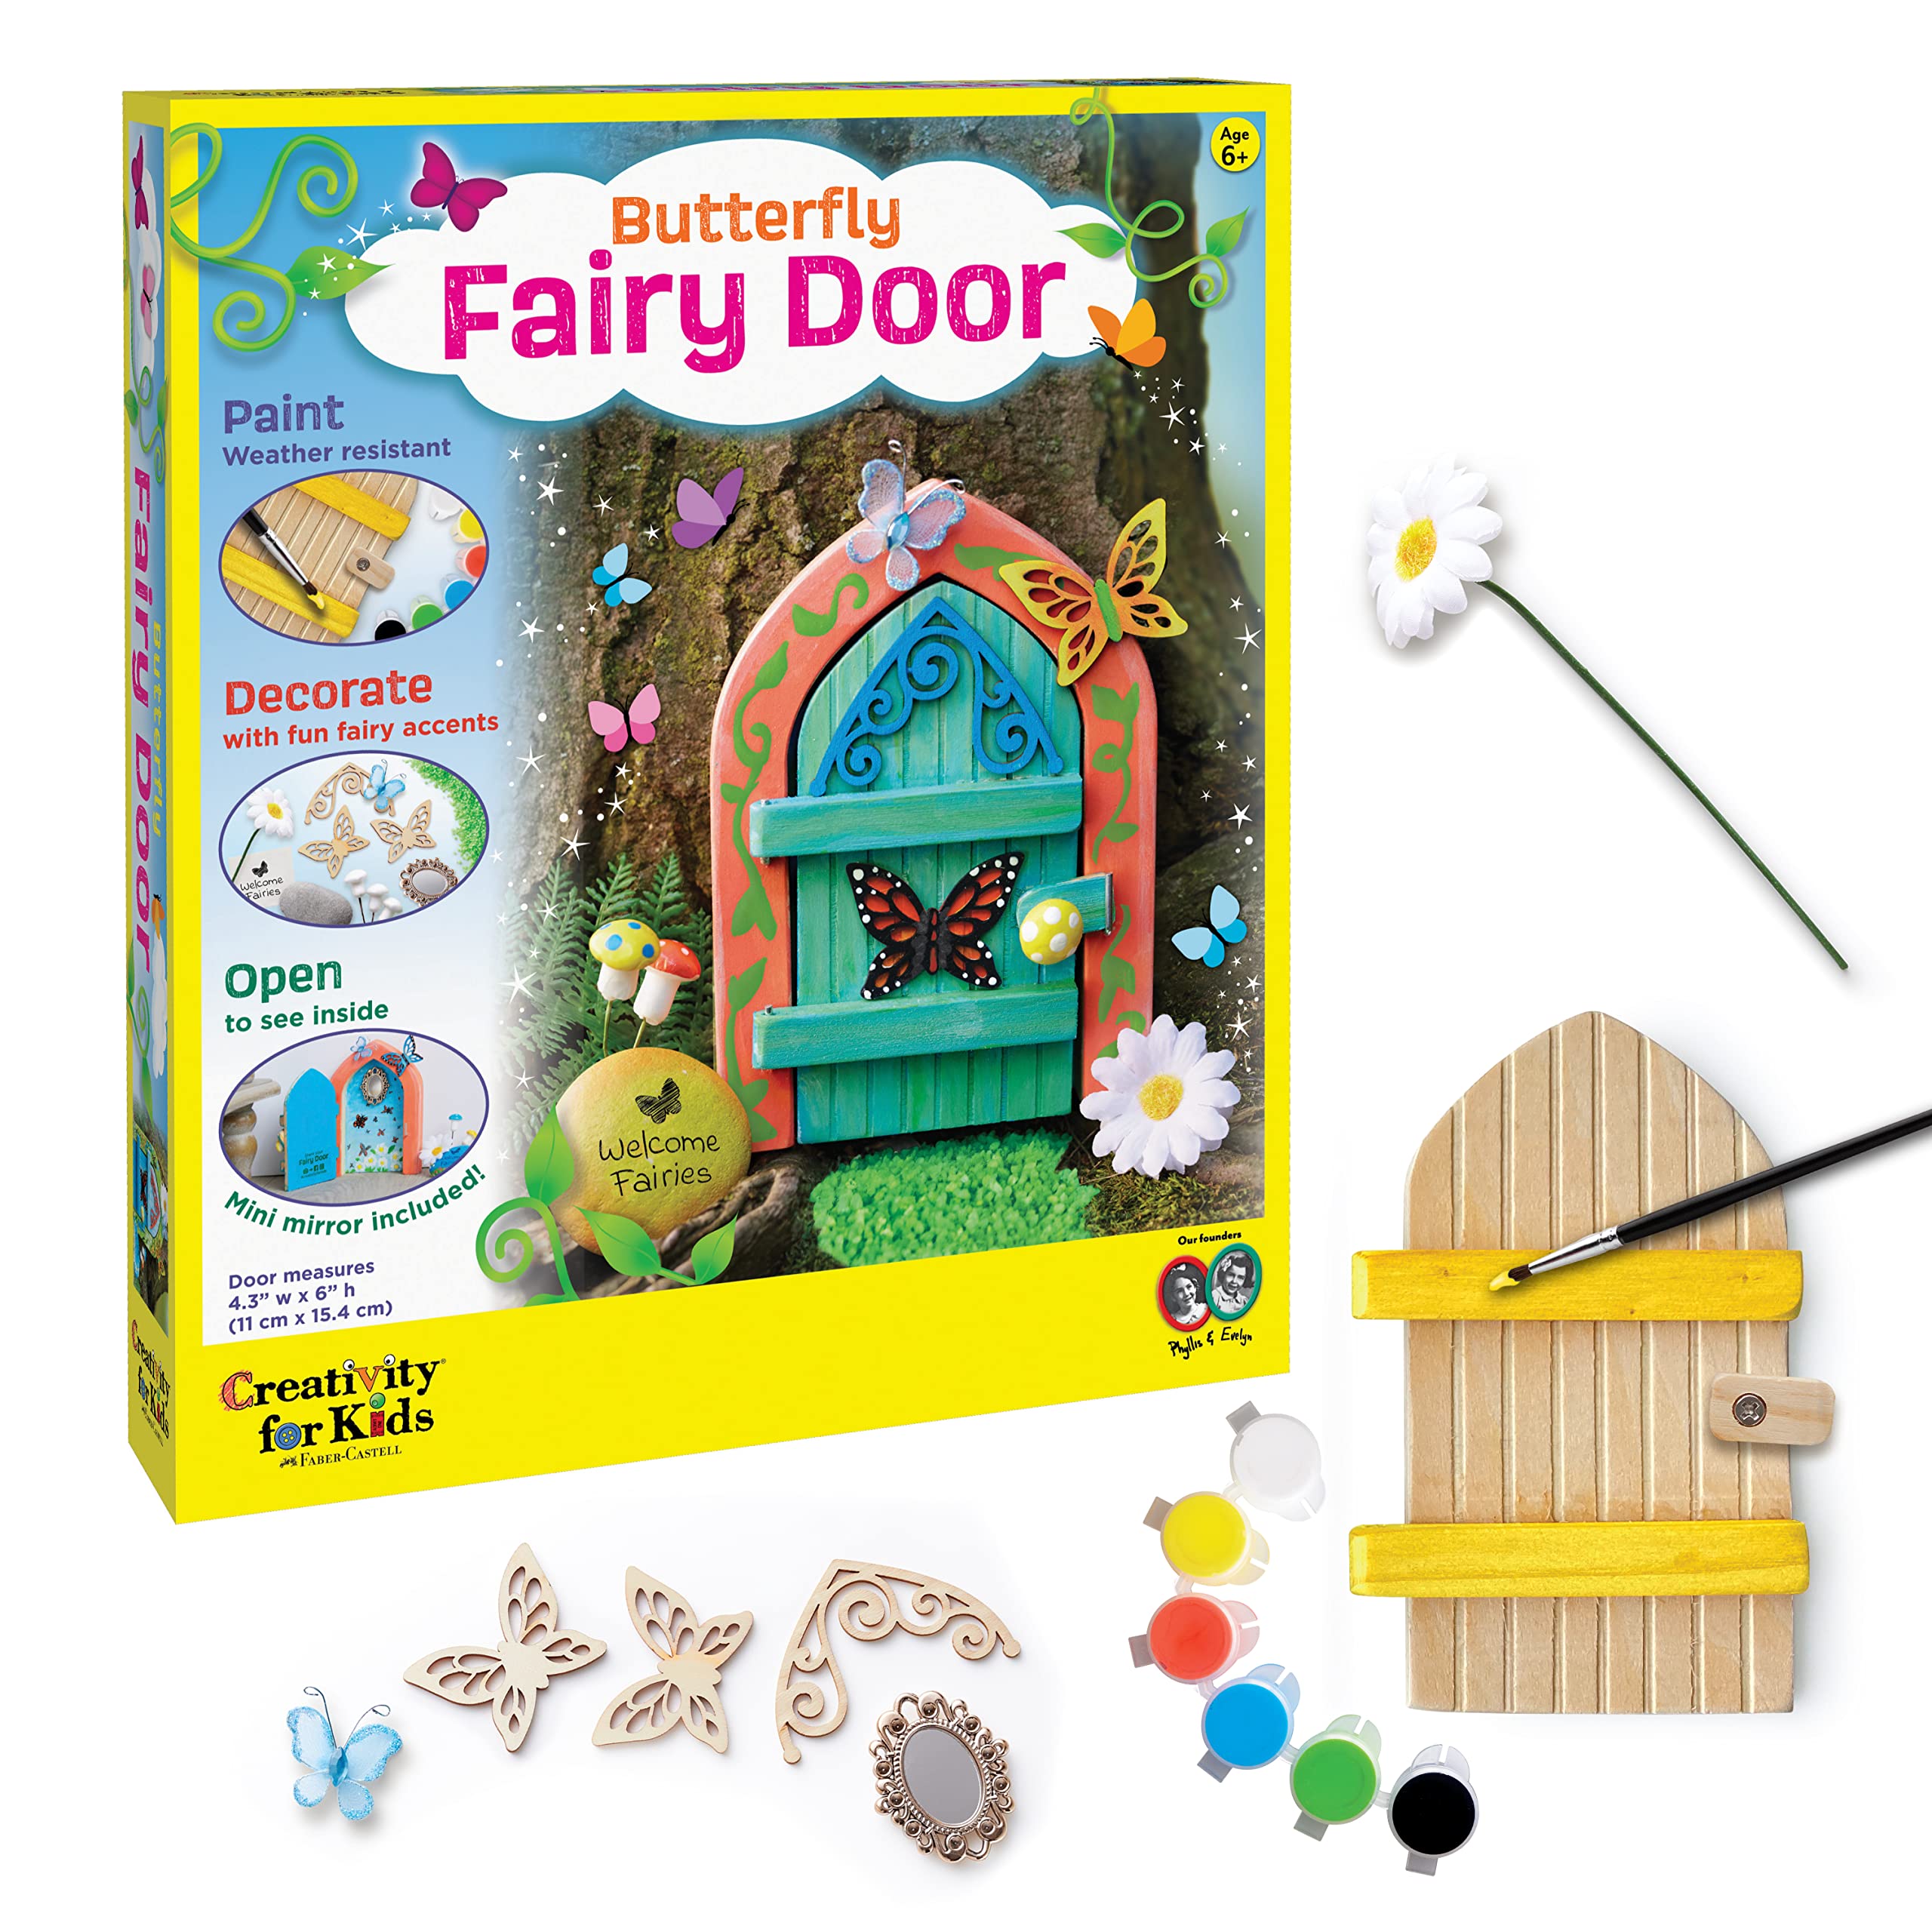 Creativity for Kids Butterfly Fairy Door Kit - Painting Arts and Crafts for Kids, Creative Gifts for Girls and Boys Age 6-7+ Yellow